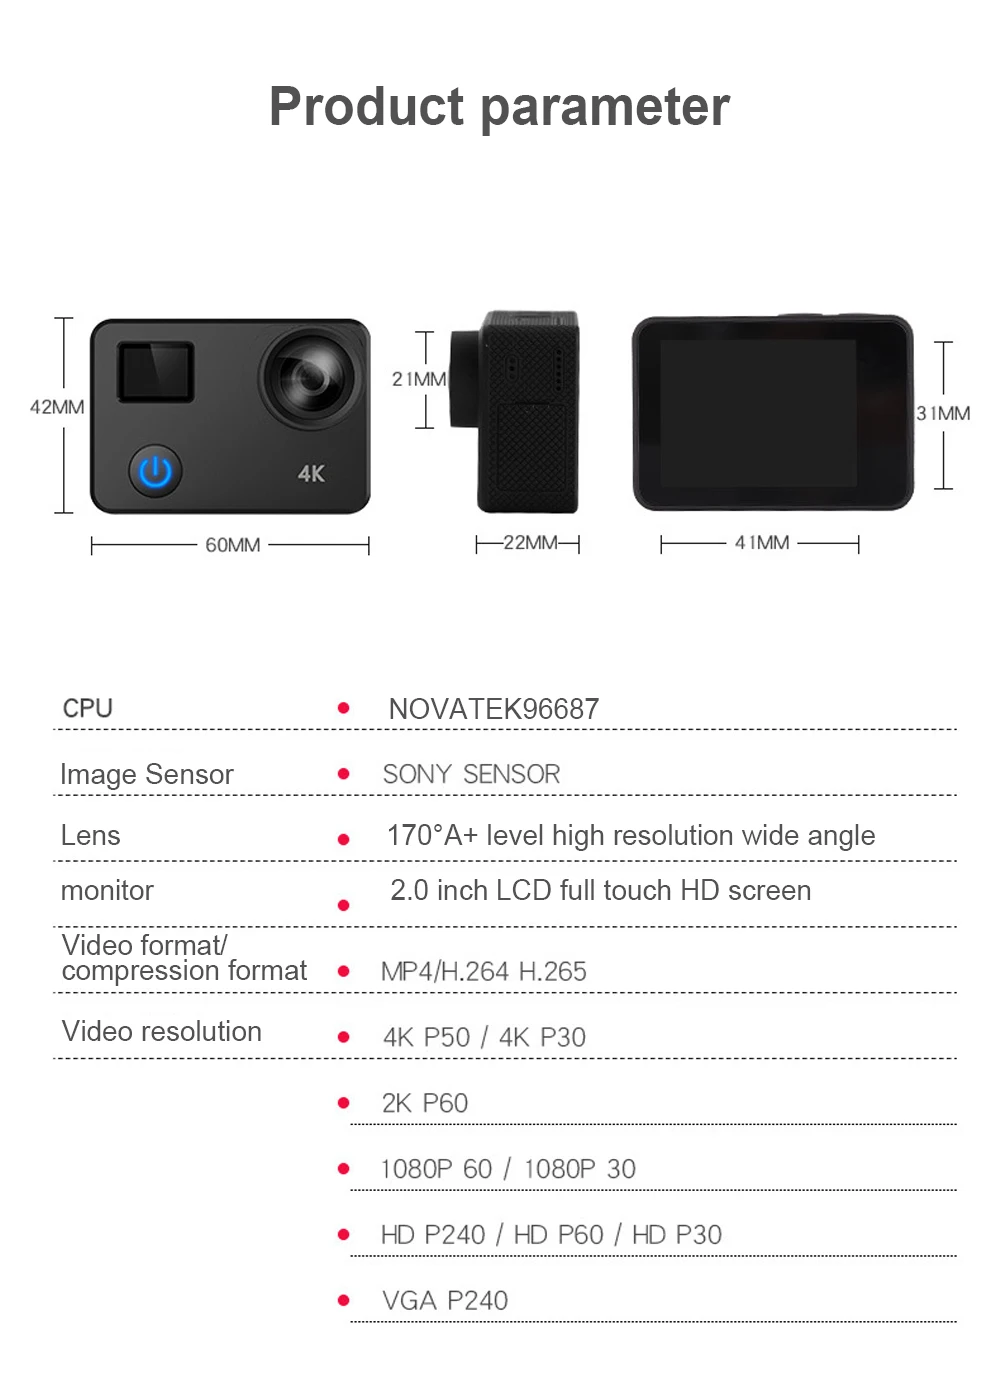 4K Action Camera for Shooting Video With Remote Control